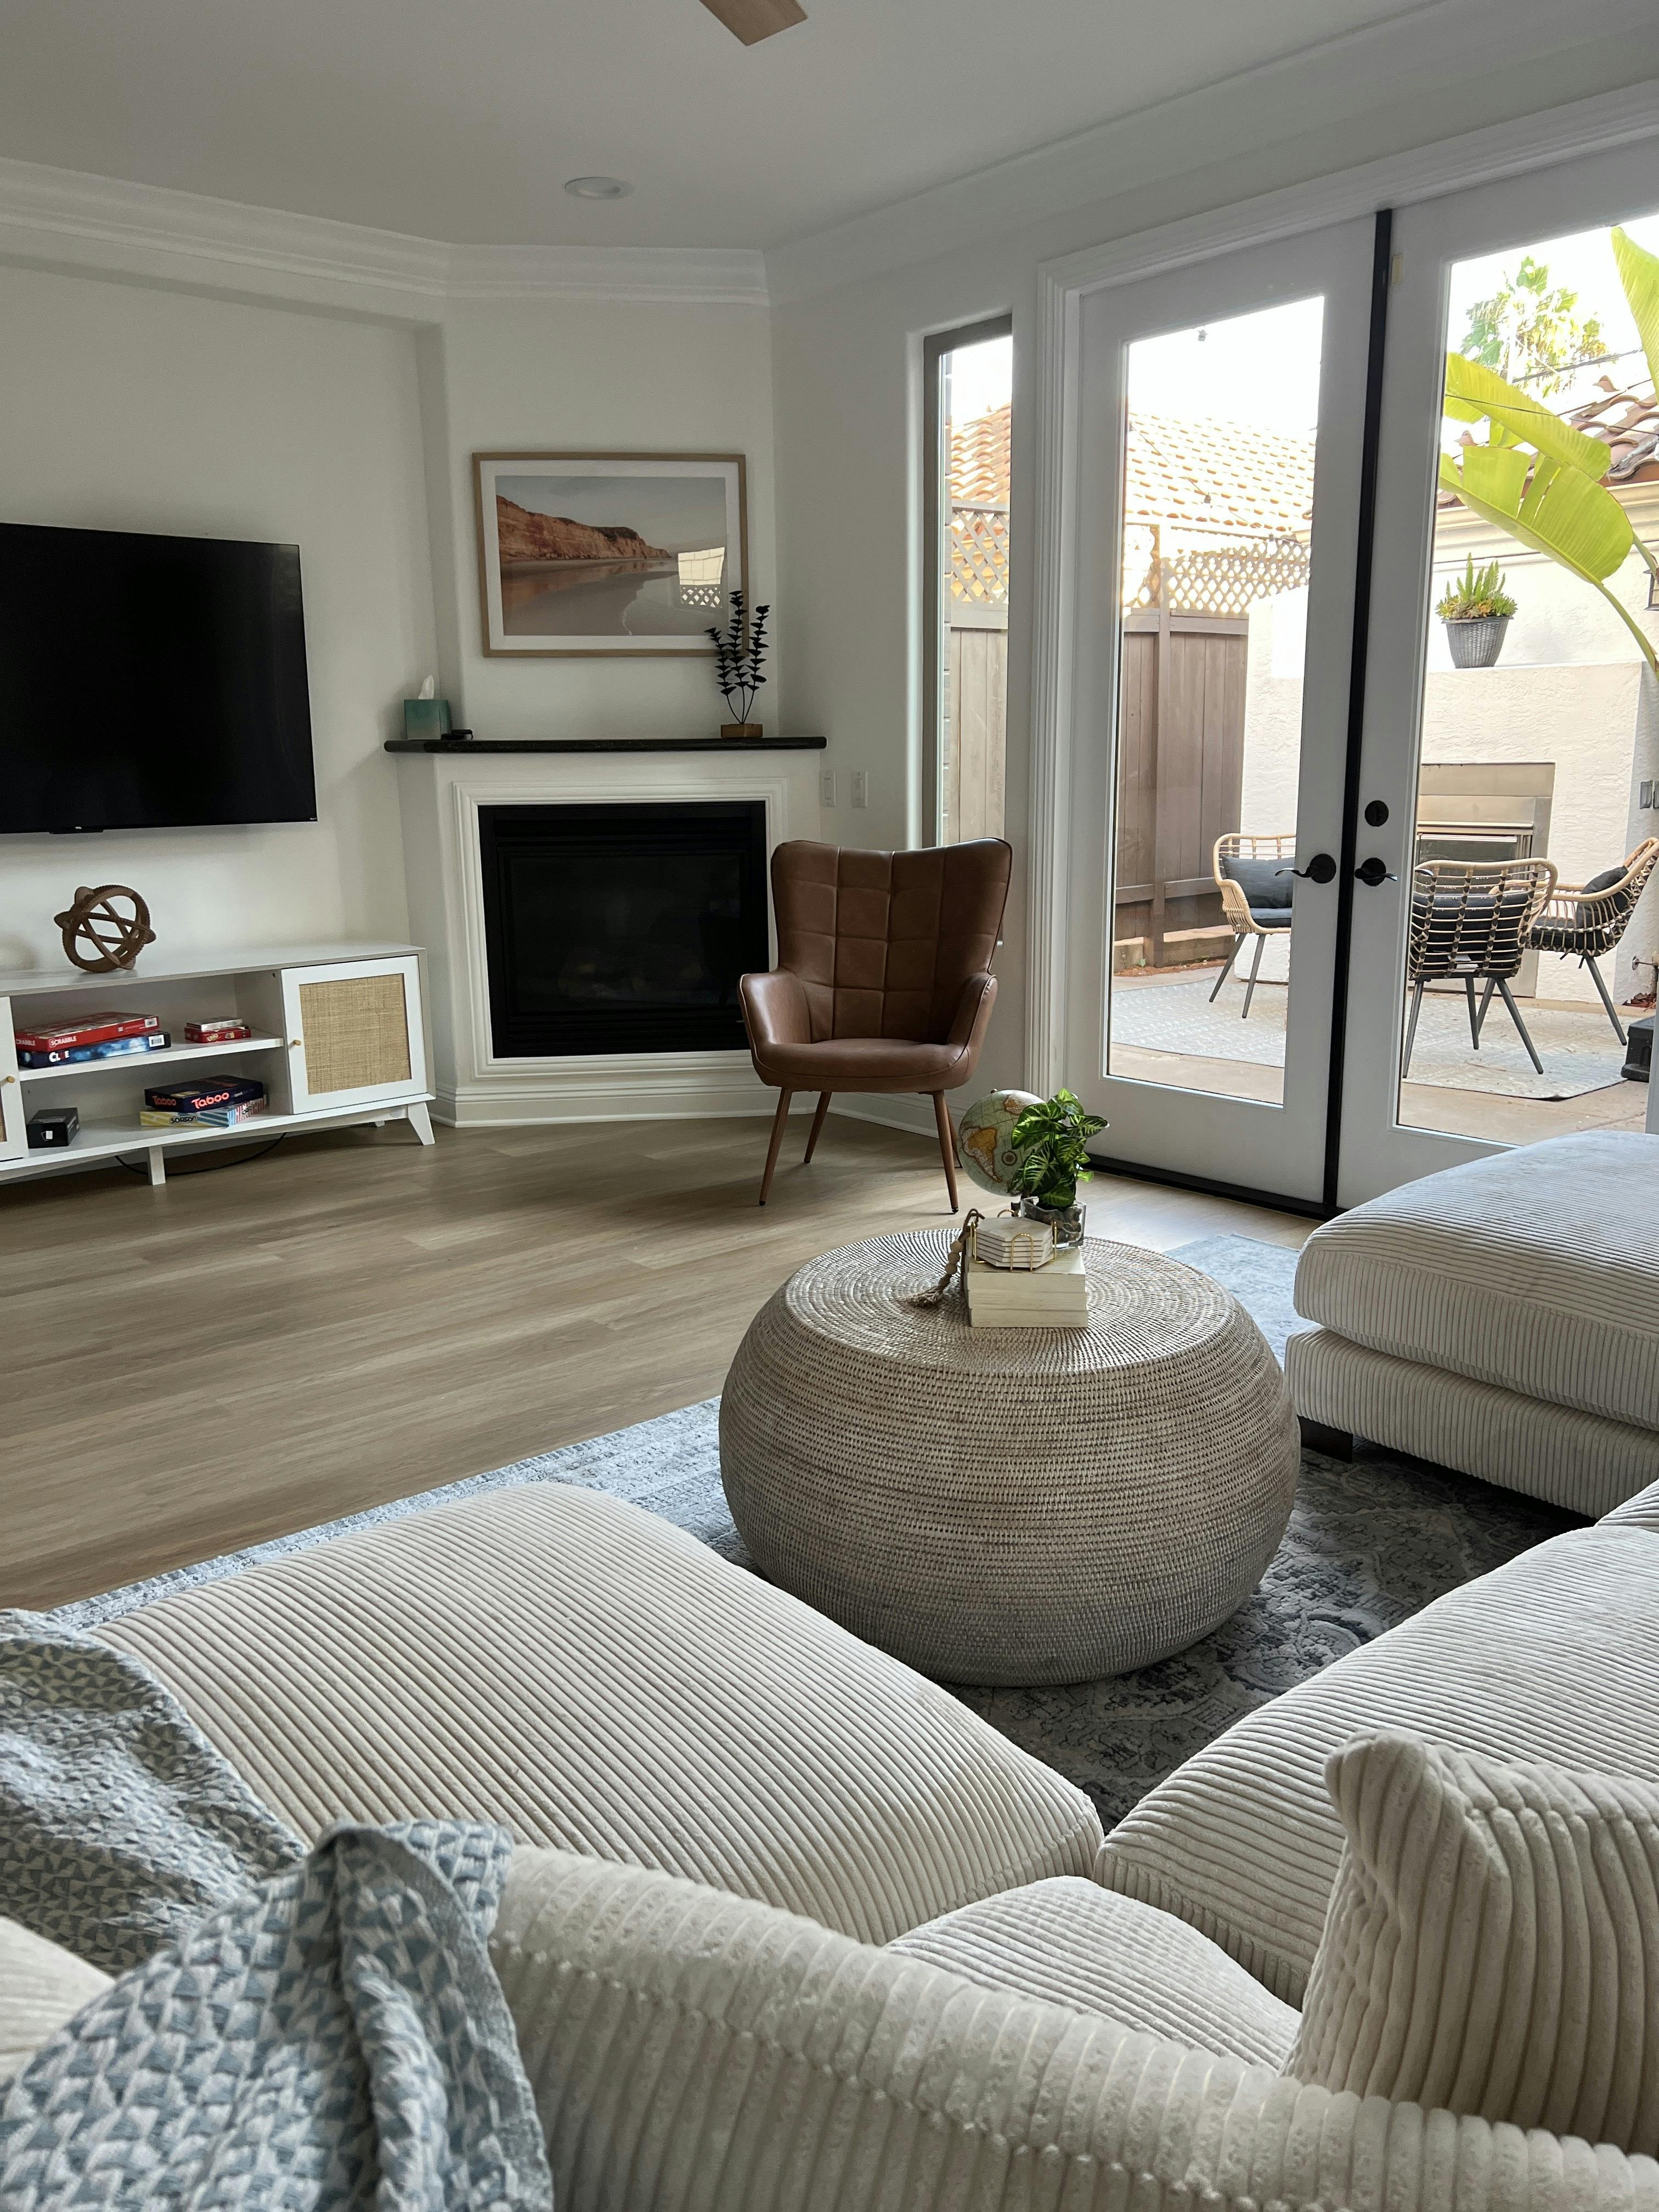 You can't go wrong with neutral, elegent design in your short term rental.